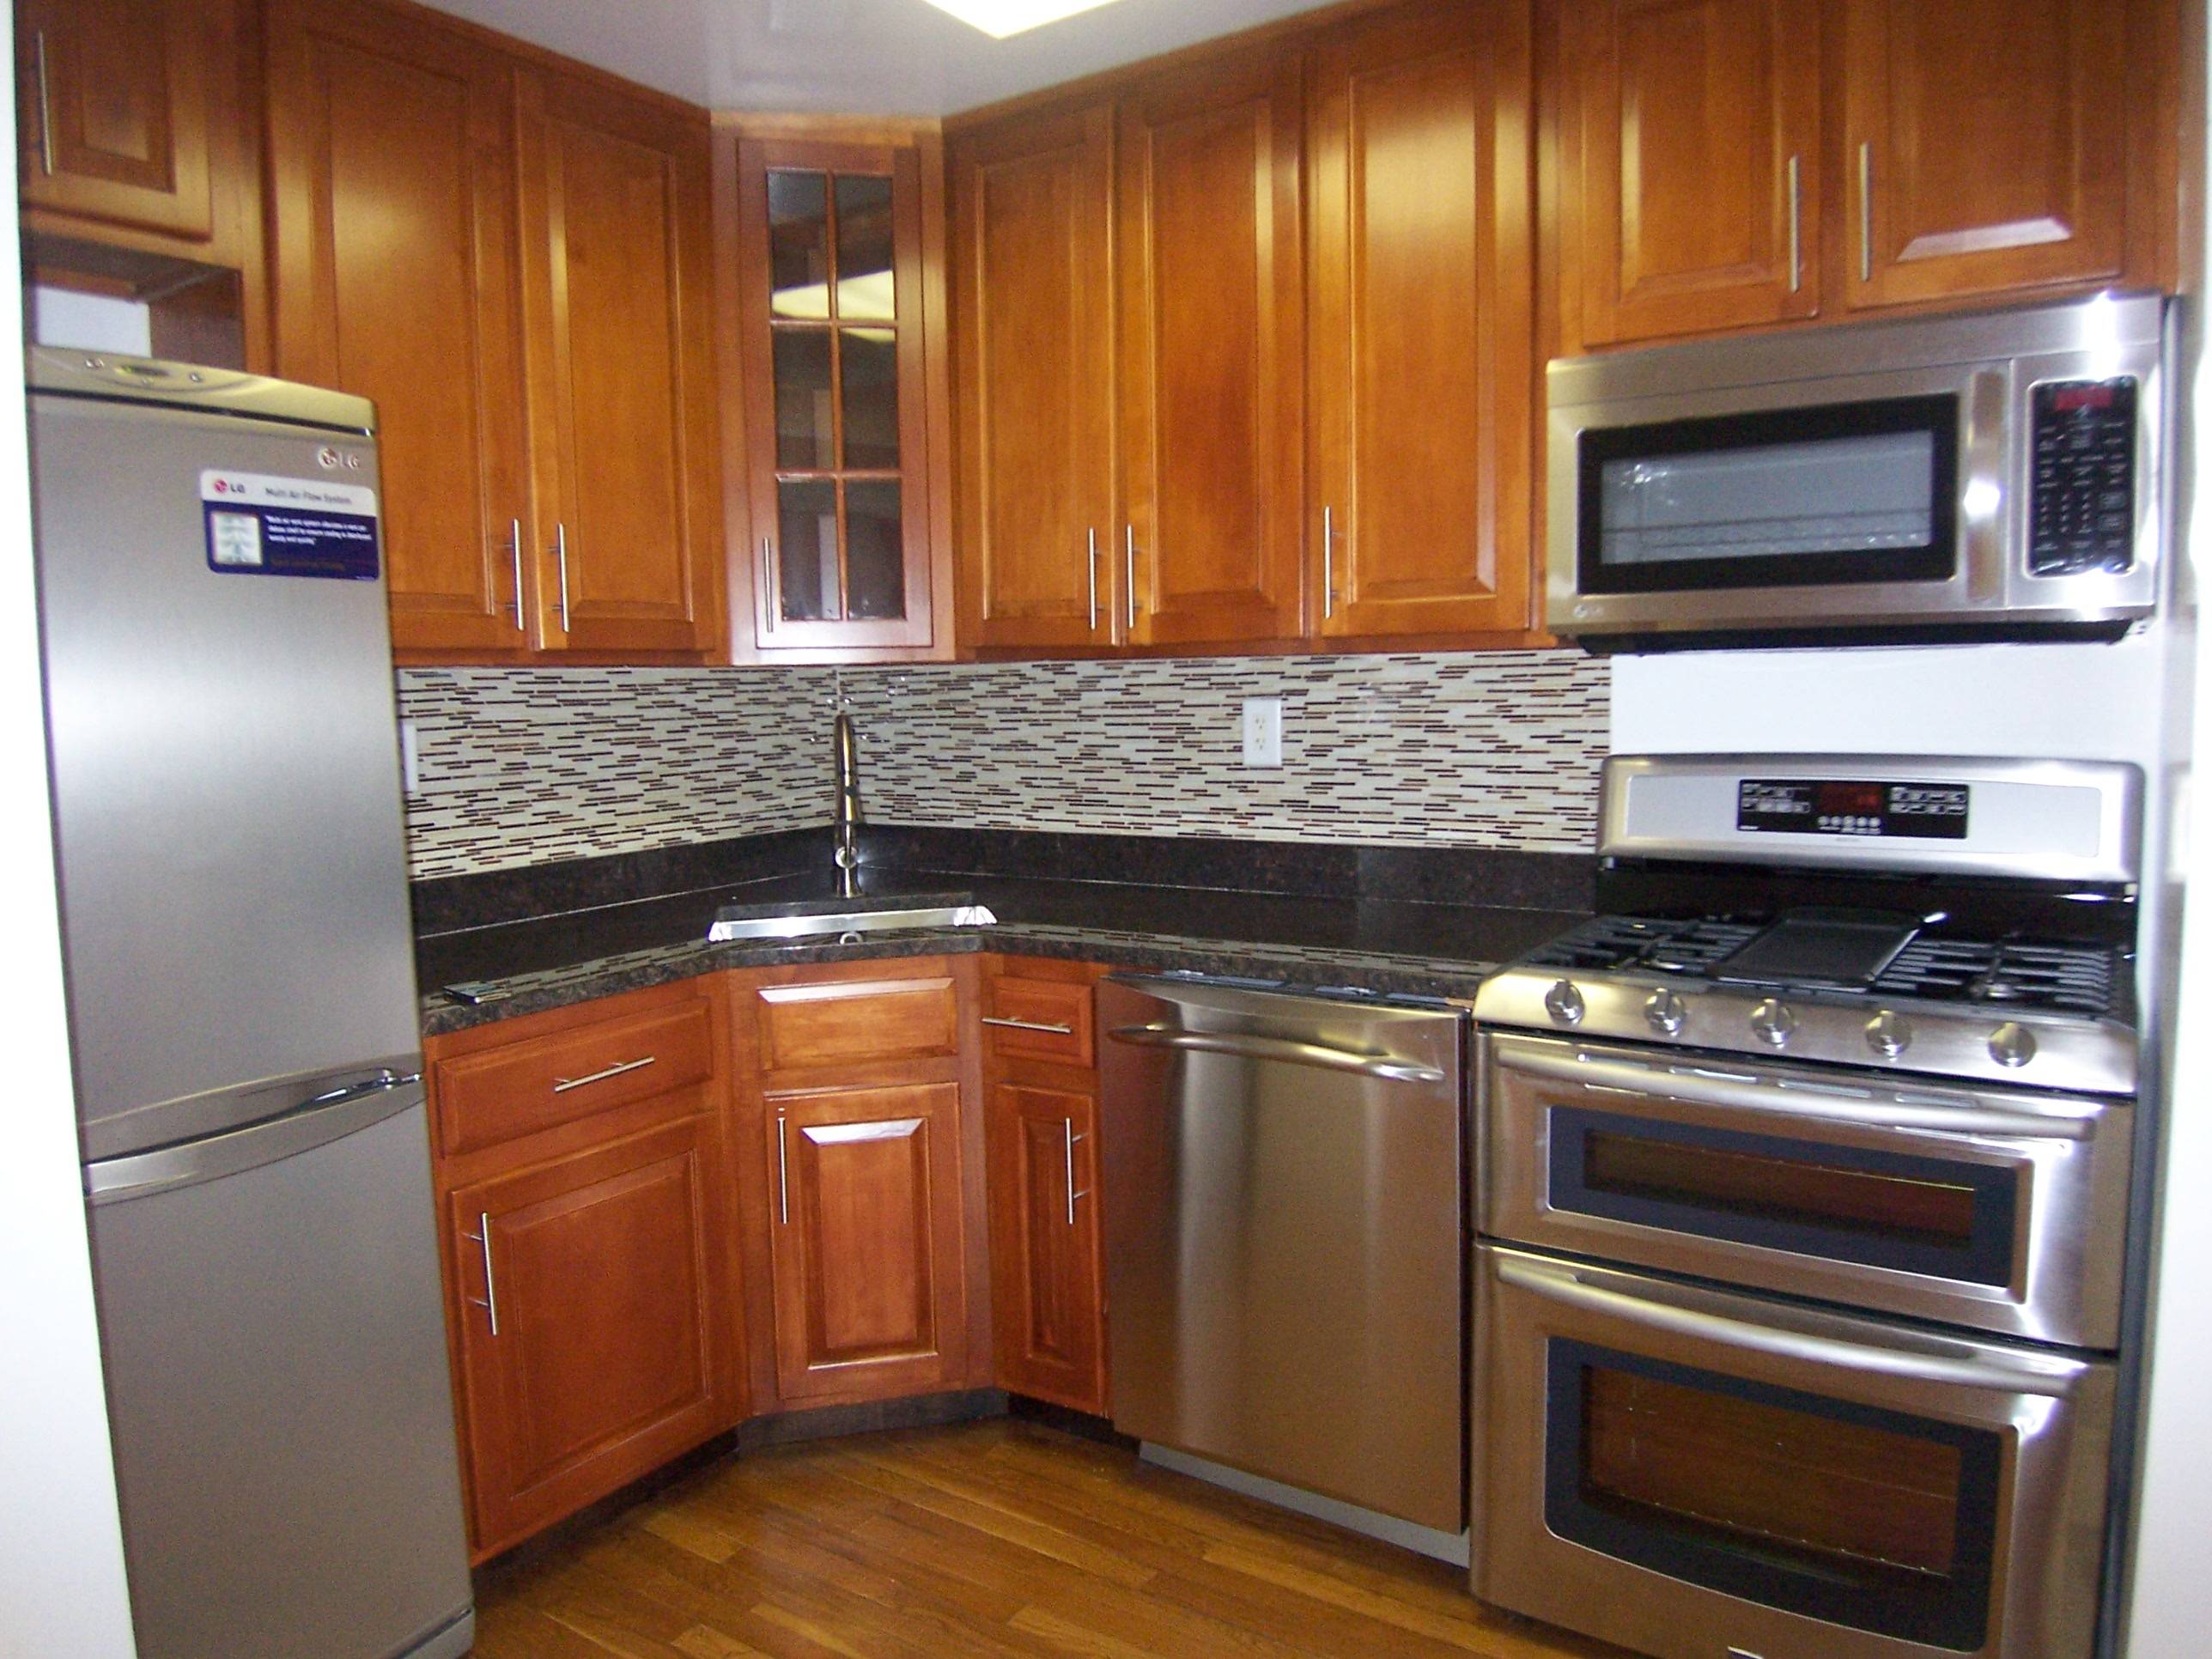 Terrific Renovated ! Two Bedroom Duplex! For Sale on the Upper West Side near Central Park and Transportation